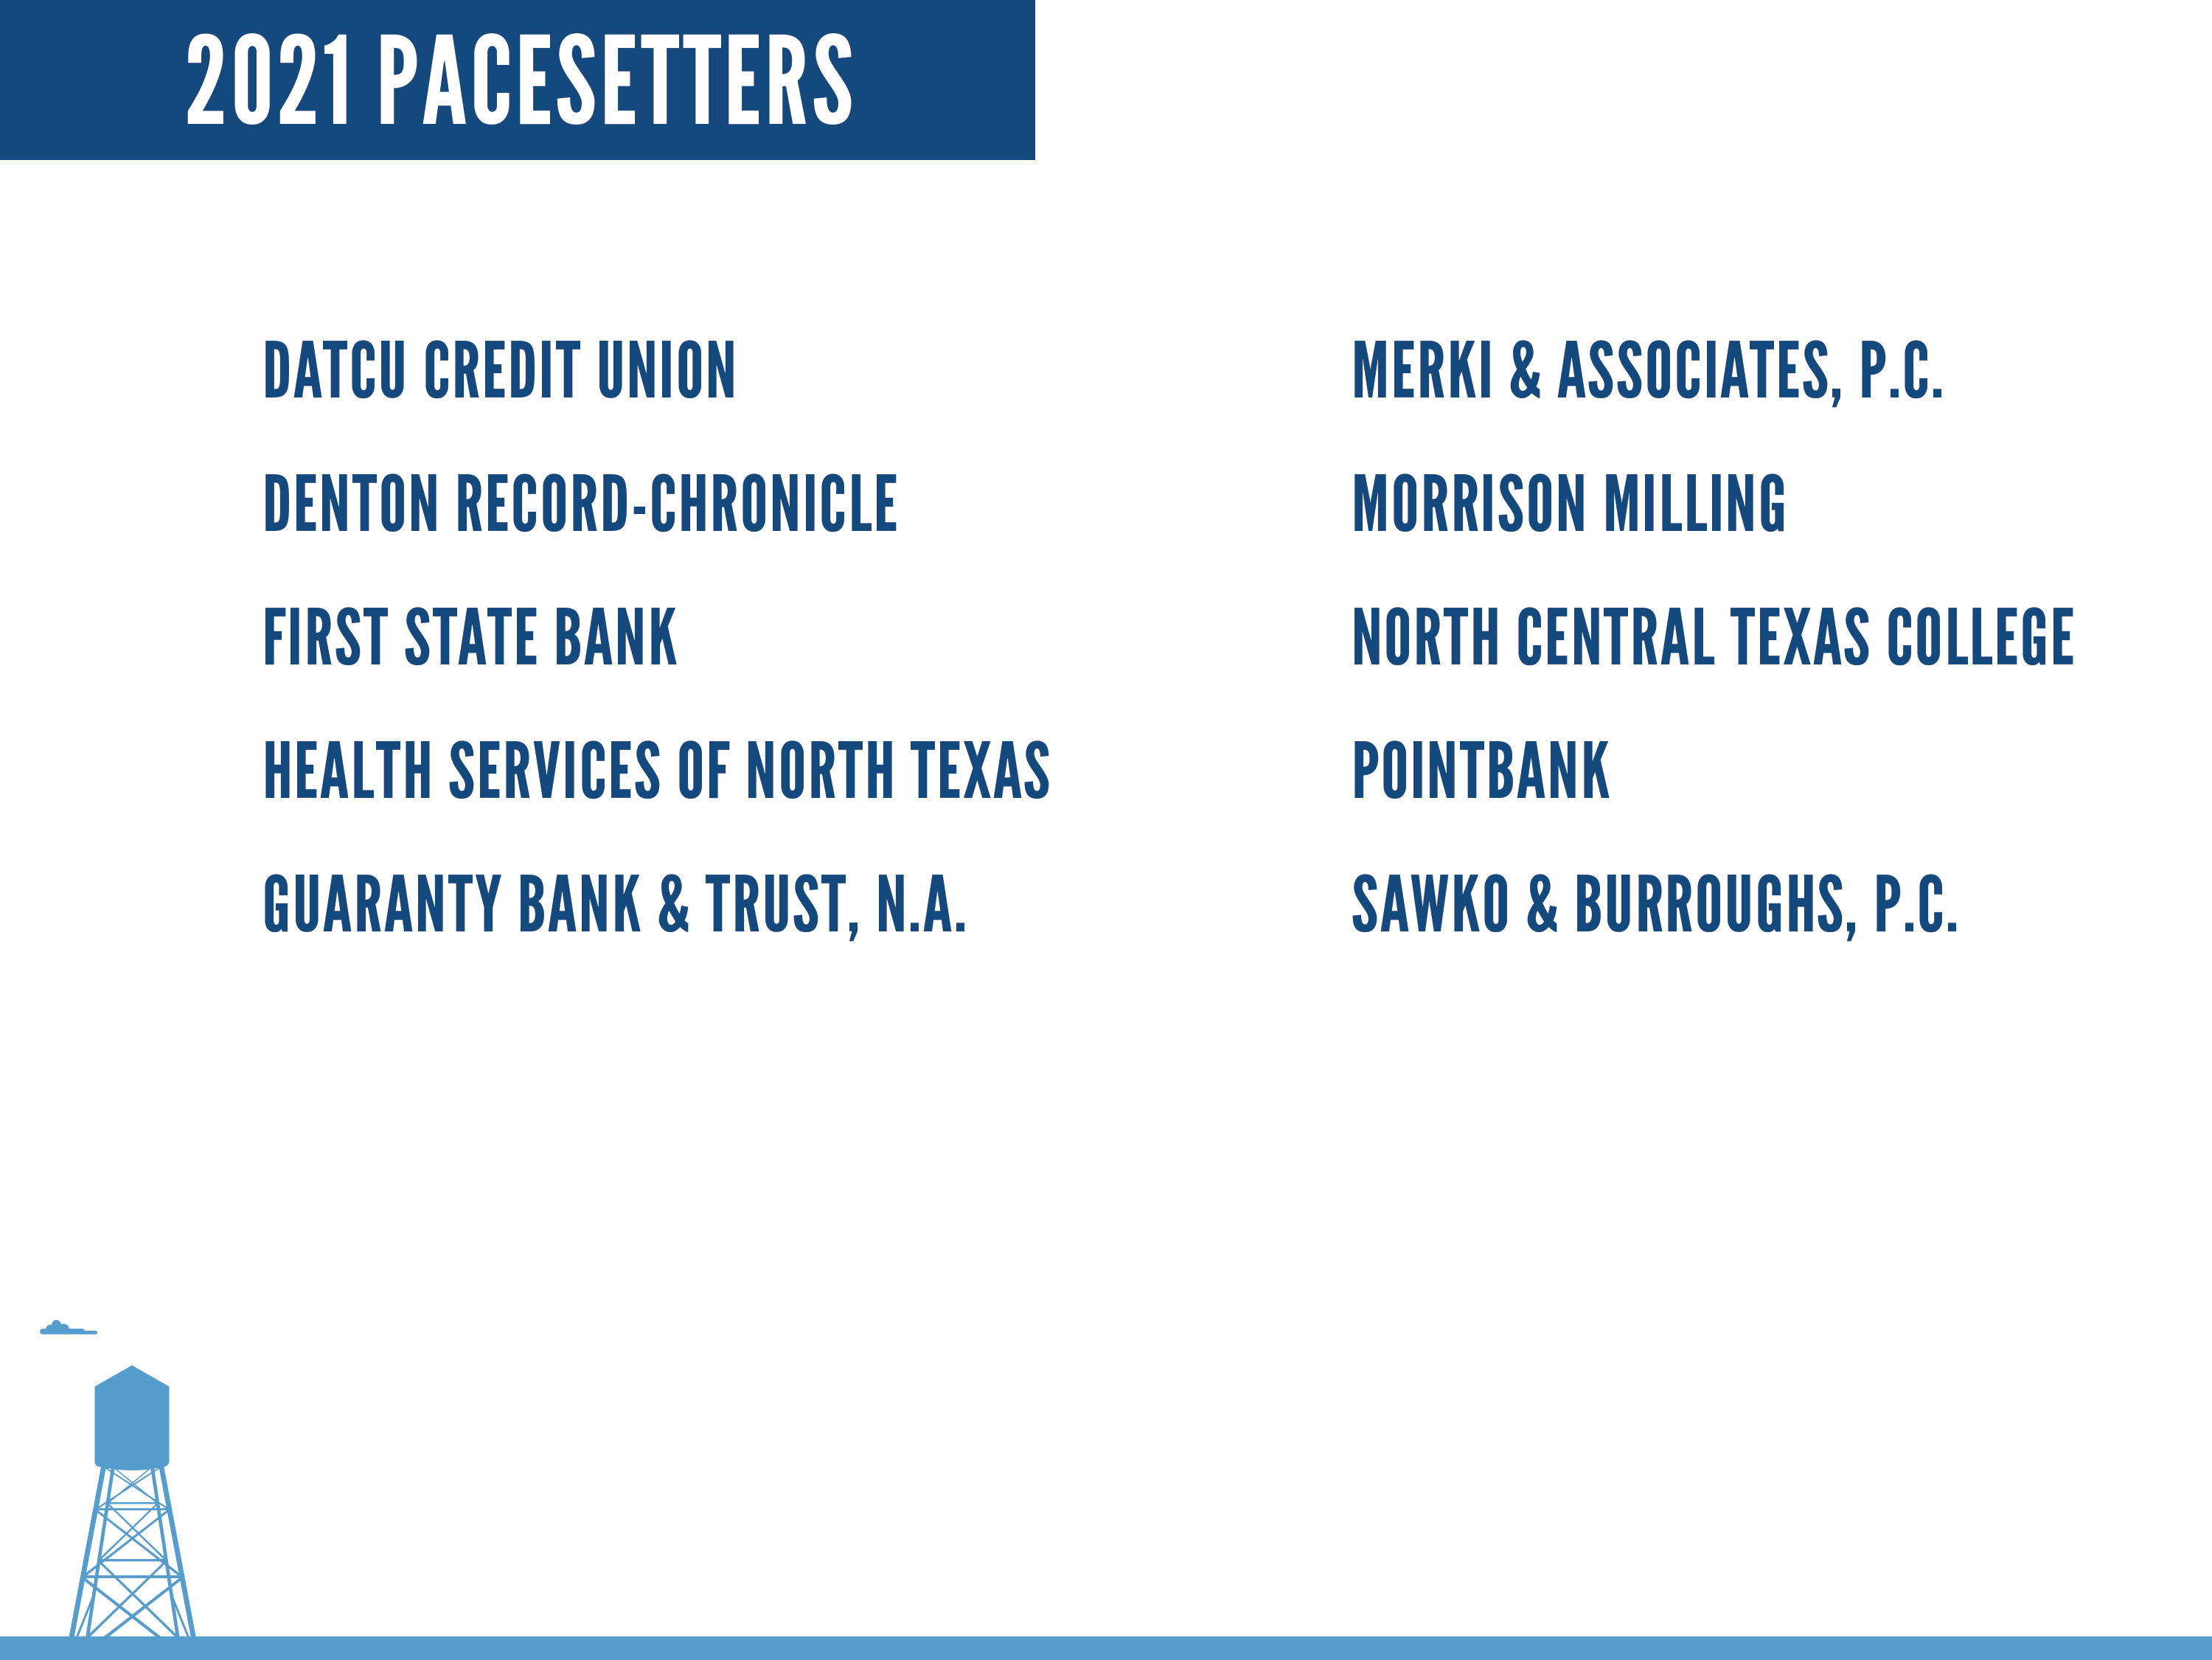 Pacesetter Companies